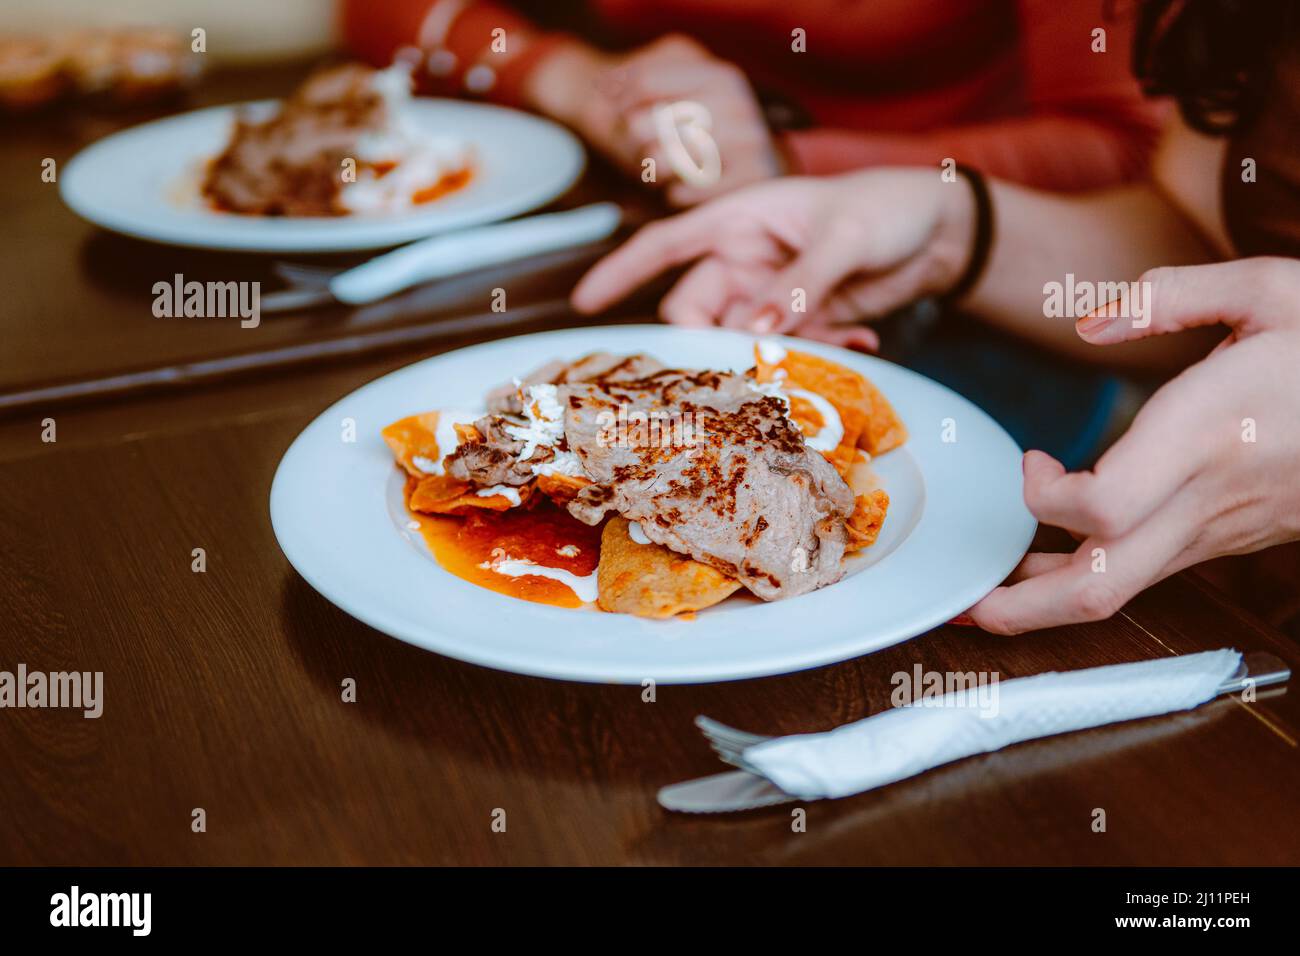 In a restaurant they serve a plate of chilaquiles with cream, cheese and red sauce, a delicious Mexican dish. Stock Photo